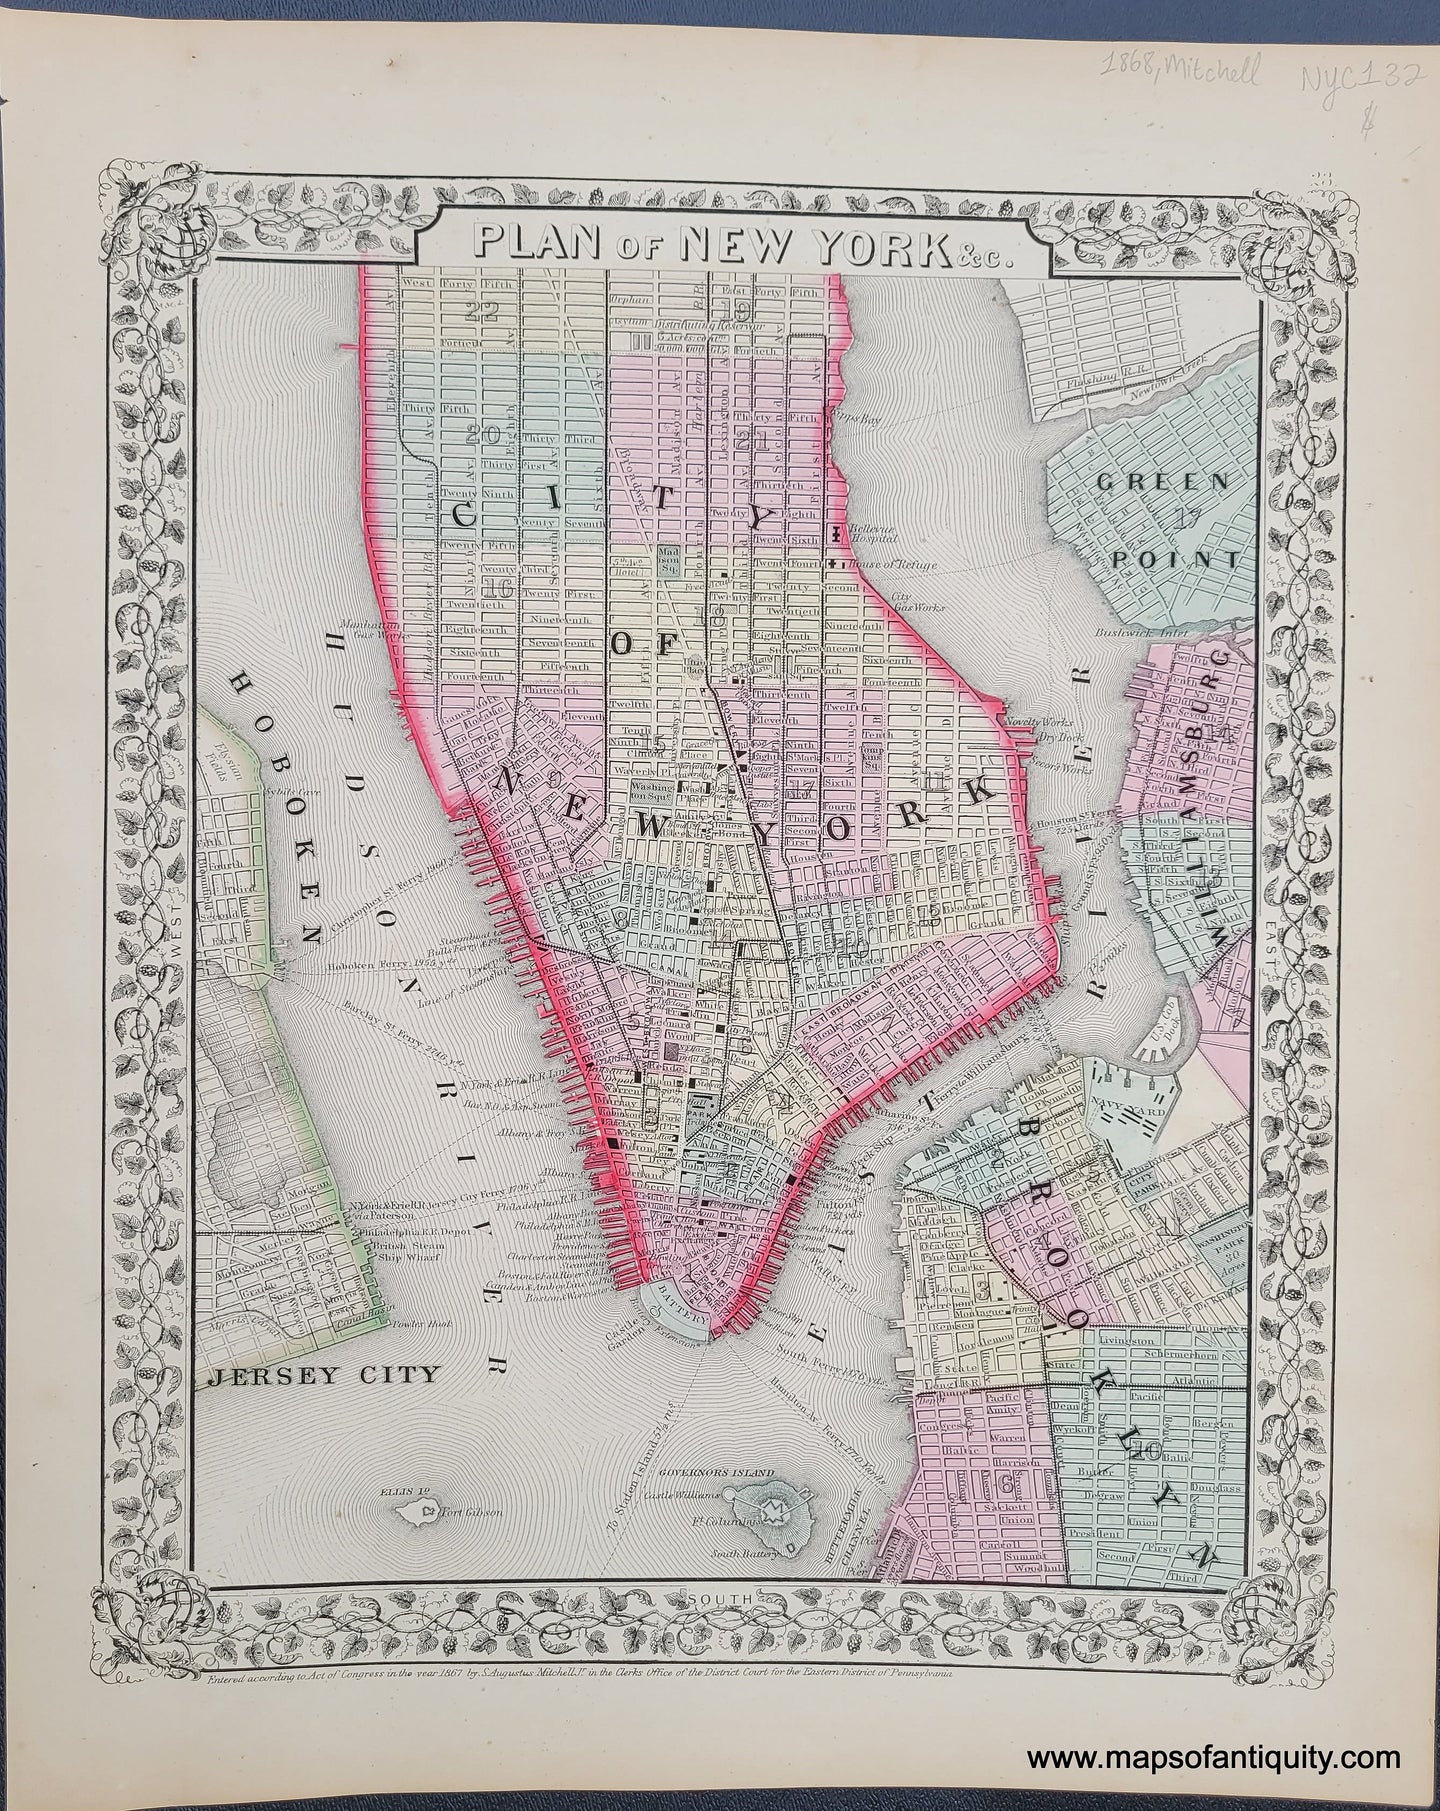 Antique-Hand-Colored-Map-Plan-of-New-York-1868-Mitchell-Maps-Of-Antiquity